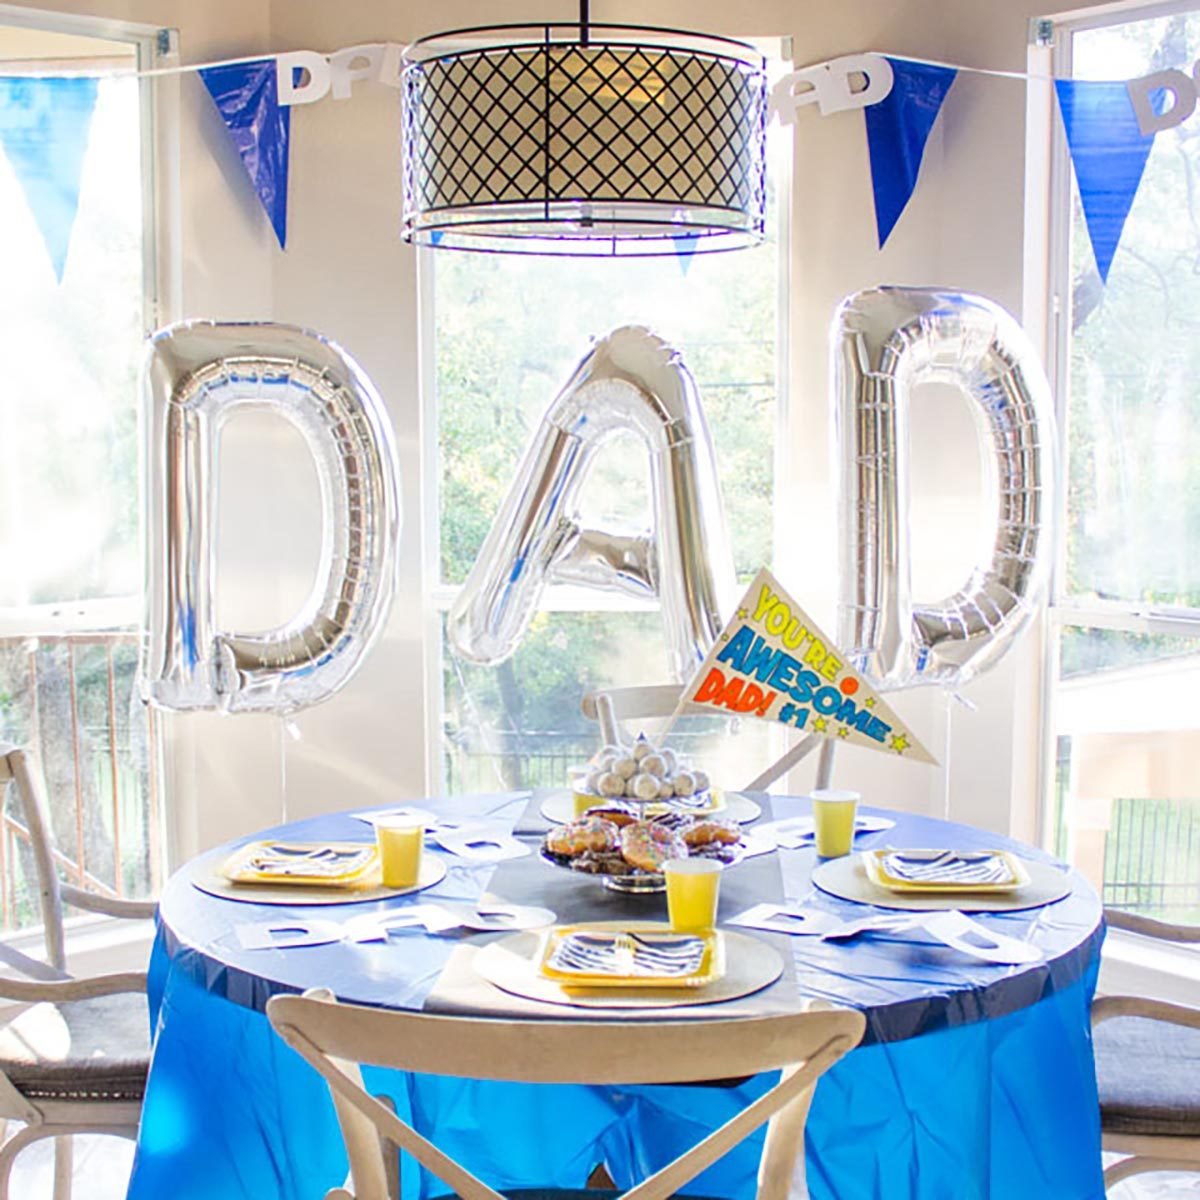 father's day 2019 decorations